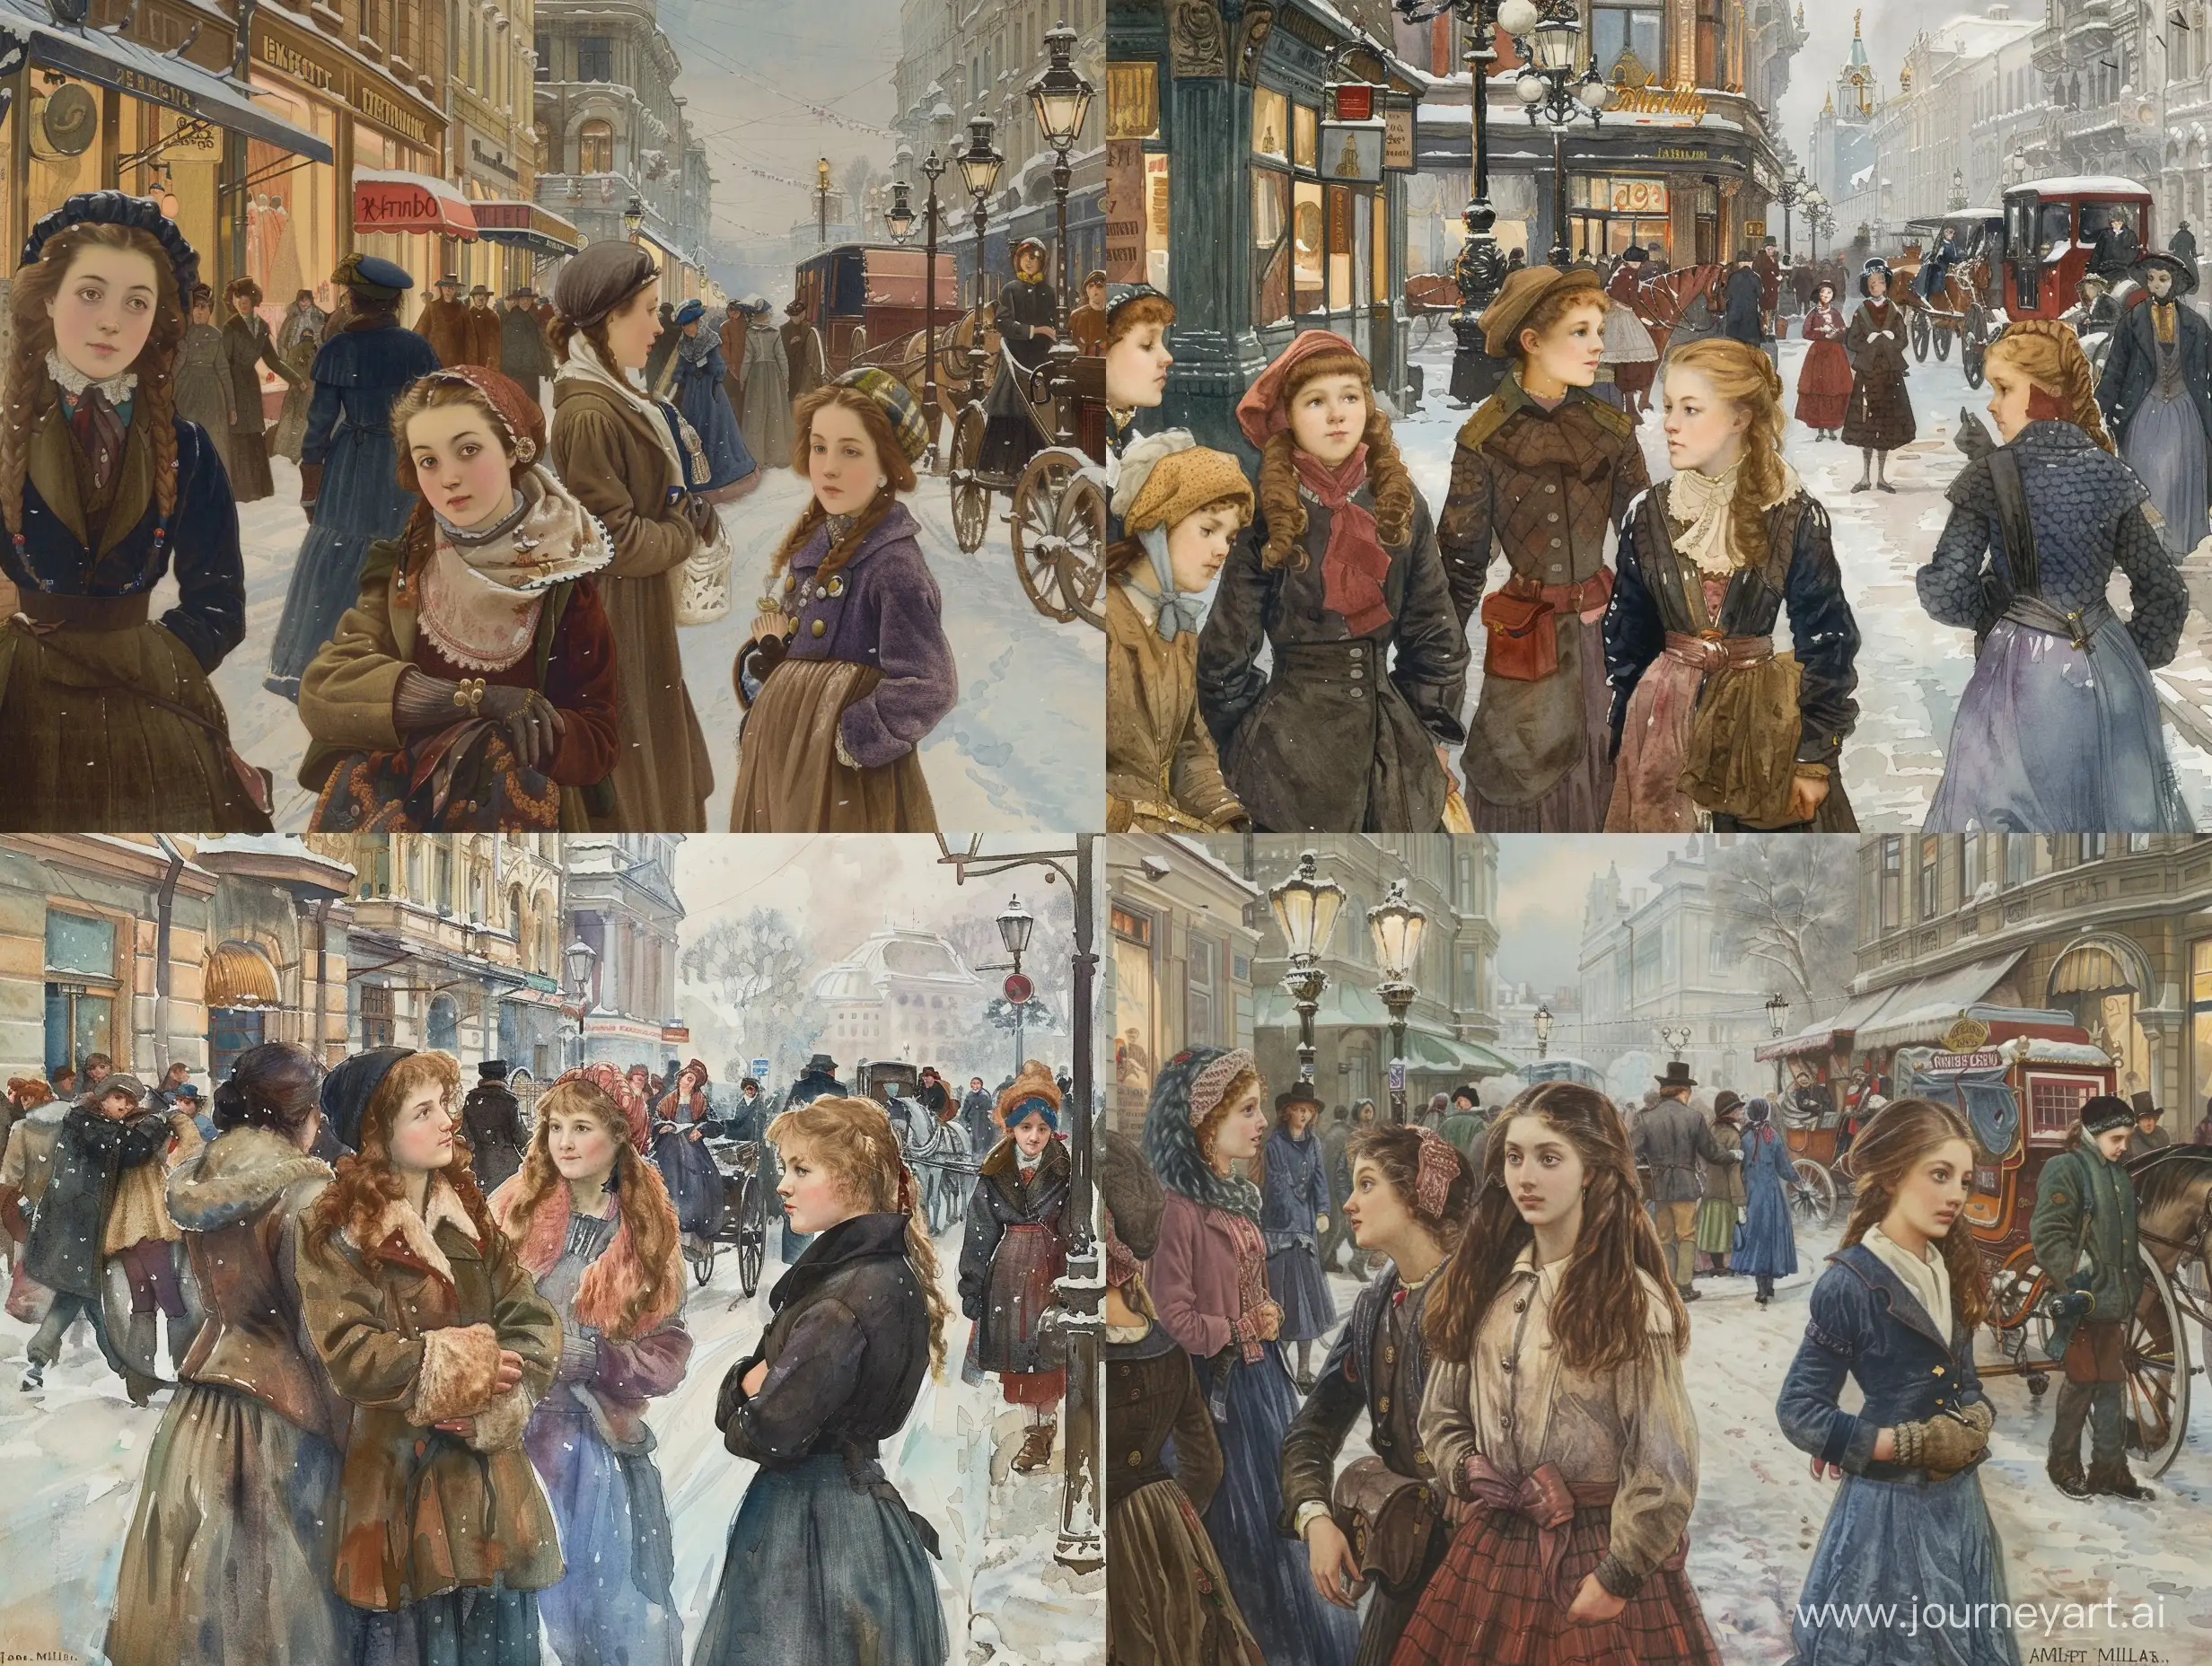 Subject: The central theme of the image is a winter scene in Moskau in 1890, capturing the essence of a busy street Arbat. The focus is on a group of high scool students girls, highlighting the fashion and lifestyle of the time. The artist, John Everett Millais, skillfully brings the historic setting to life through his Wathercolor painting. Setting: The background features a bustling street in Moskau during winter, creating a lively atmosphere with people engaging in various activities. The winter setting adds a charming touch, with perhaps snow-covered streets and vintage architecture Arbat. Style/Coloring: Millais employs the classic style of oil painting, using rich and warm colors to evoke the ambiance of the early 19th century. The winter palette may include cool tones like blues and grays, contrasting with the vibrant colors of the girls' clothing. Action: The girls are depicted engaging in daily life activities, suggesting movement and vivacity. Millais captures the dynamic energy of the busy street, enhancing the narrative of the era. Items/Costume: The girls are likely adorned in fashionable clothing of the time, showcasing the trends and styles prevalent in 1890 Moskau. The painting may feature accessories such as hats, gloves, and other period-specific items. Appearance: The characters' appearances are refined and sophisticated, reflecting the societal norms and fashion of the early 19th century. Millais pays attention to detail, emphasizing the unique facial expressions and features of each individual. Accessories: The accessories in the painting, such as street lamps, horse-drawn carriages, and storefronts, contribute to the historical context. These details add depth and authenticity to the overall composition.